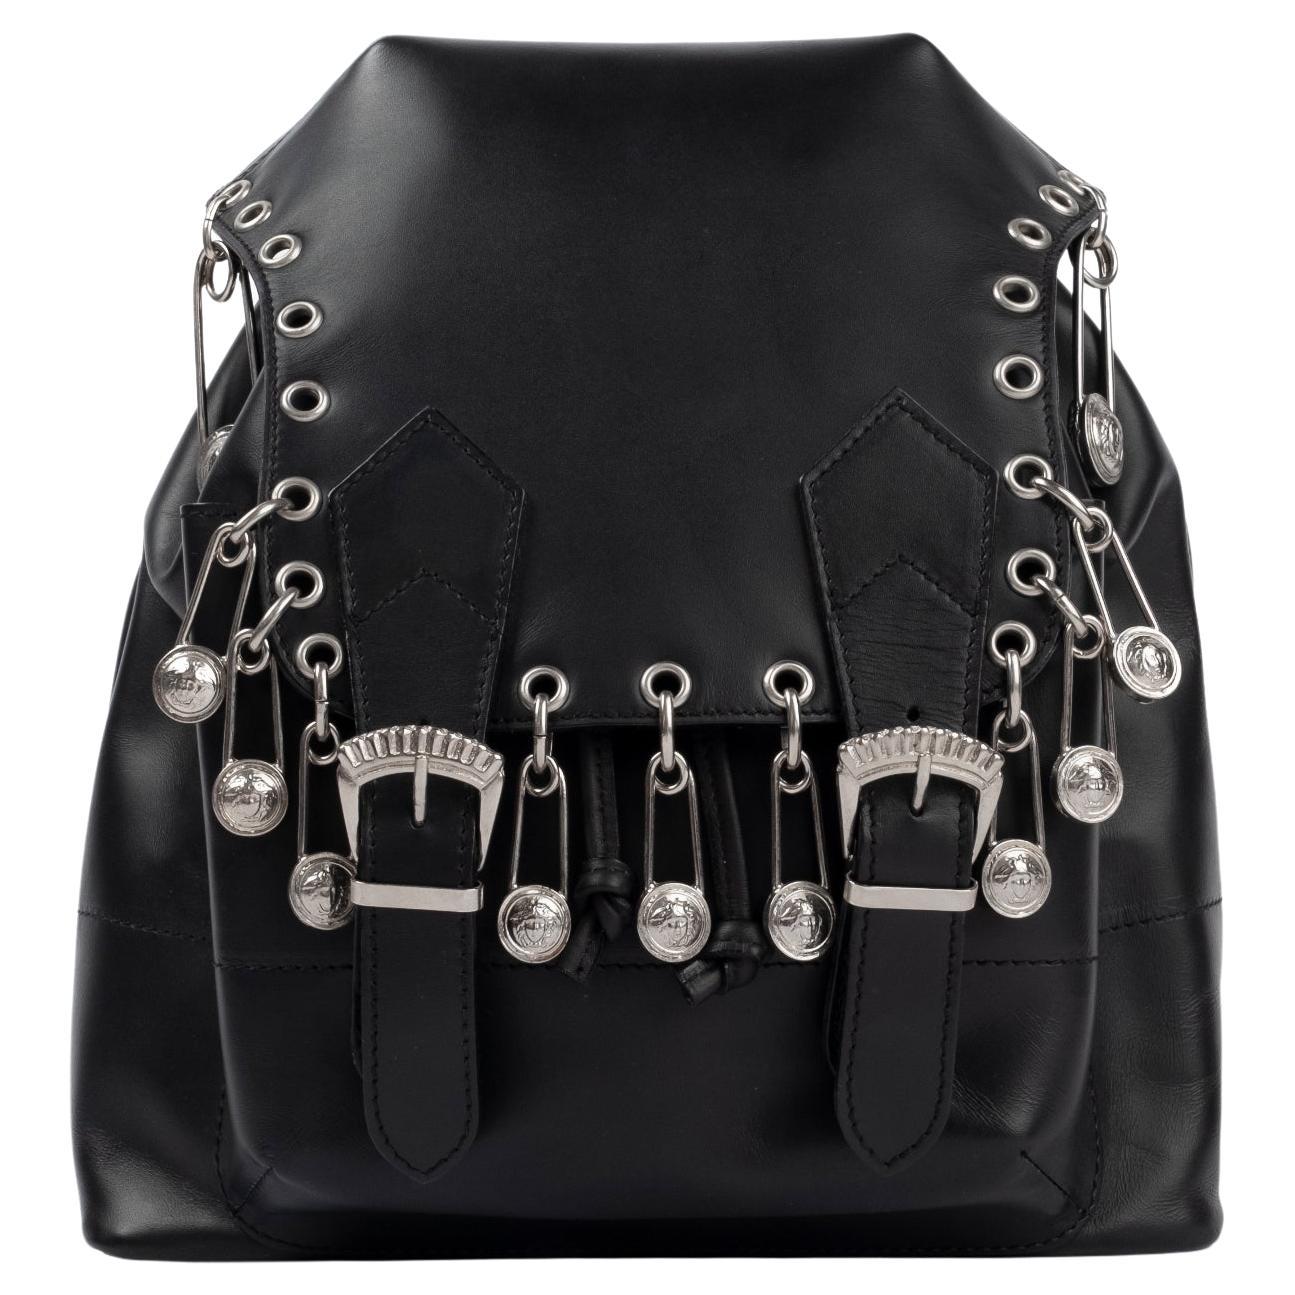 Gianni Versace SS1994 Safety Pin Backpack